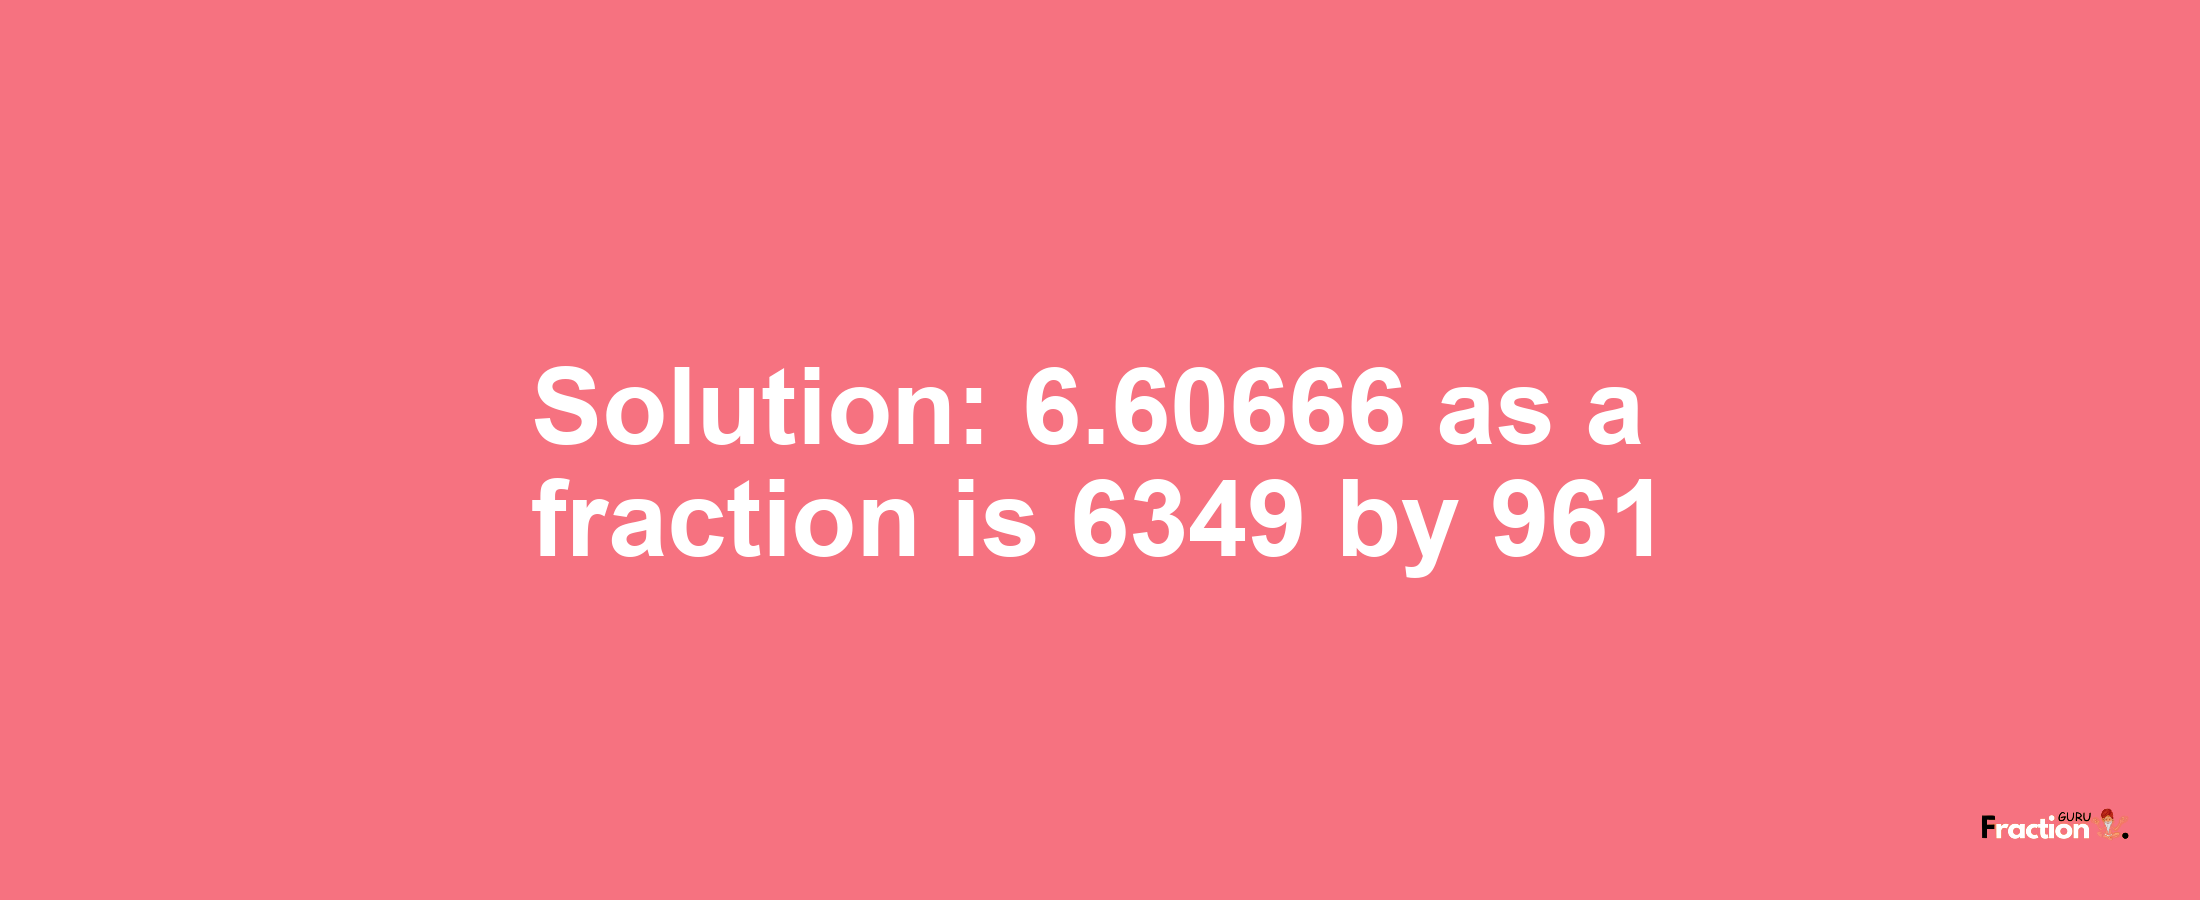 Solution:6.60666 as a fraction is 6349/961